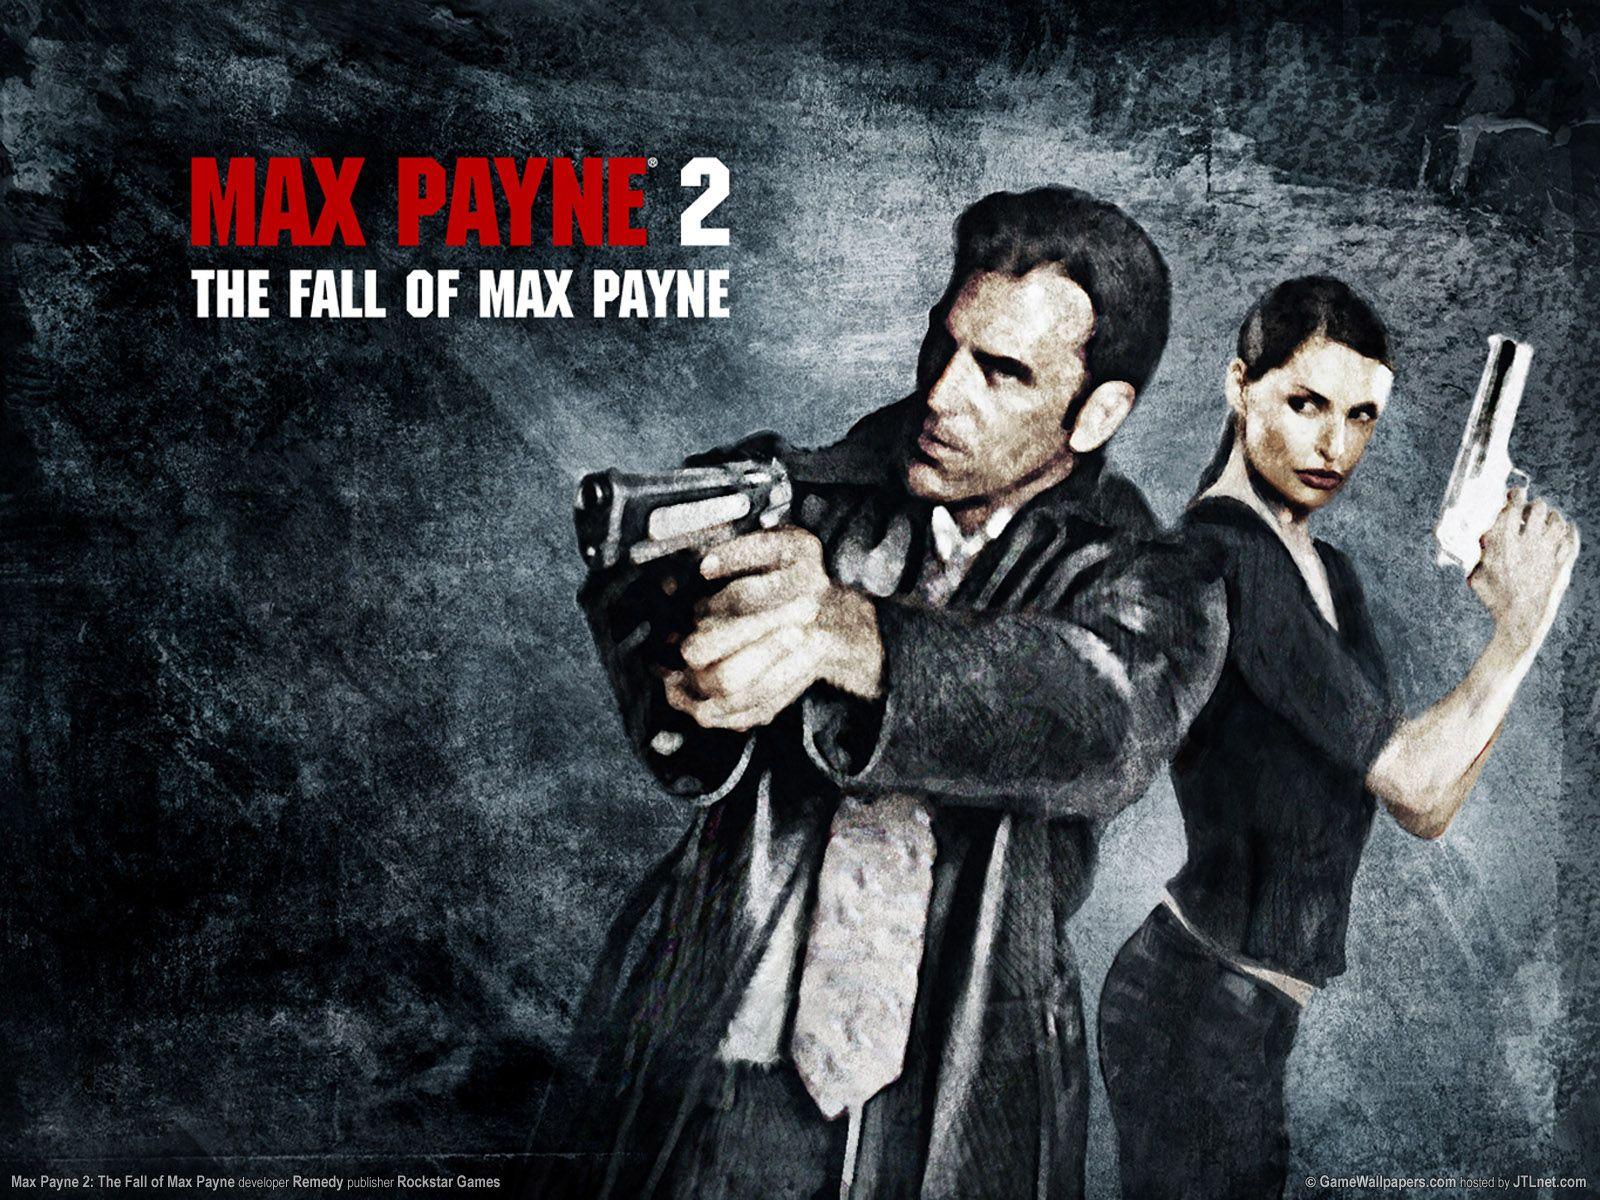 Max Payne 2: The Fall of Max Payne. PC Games Archive